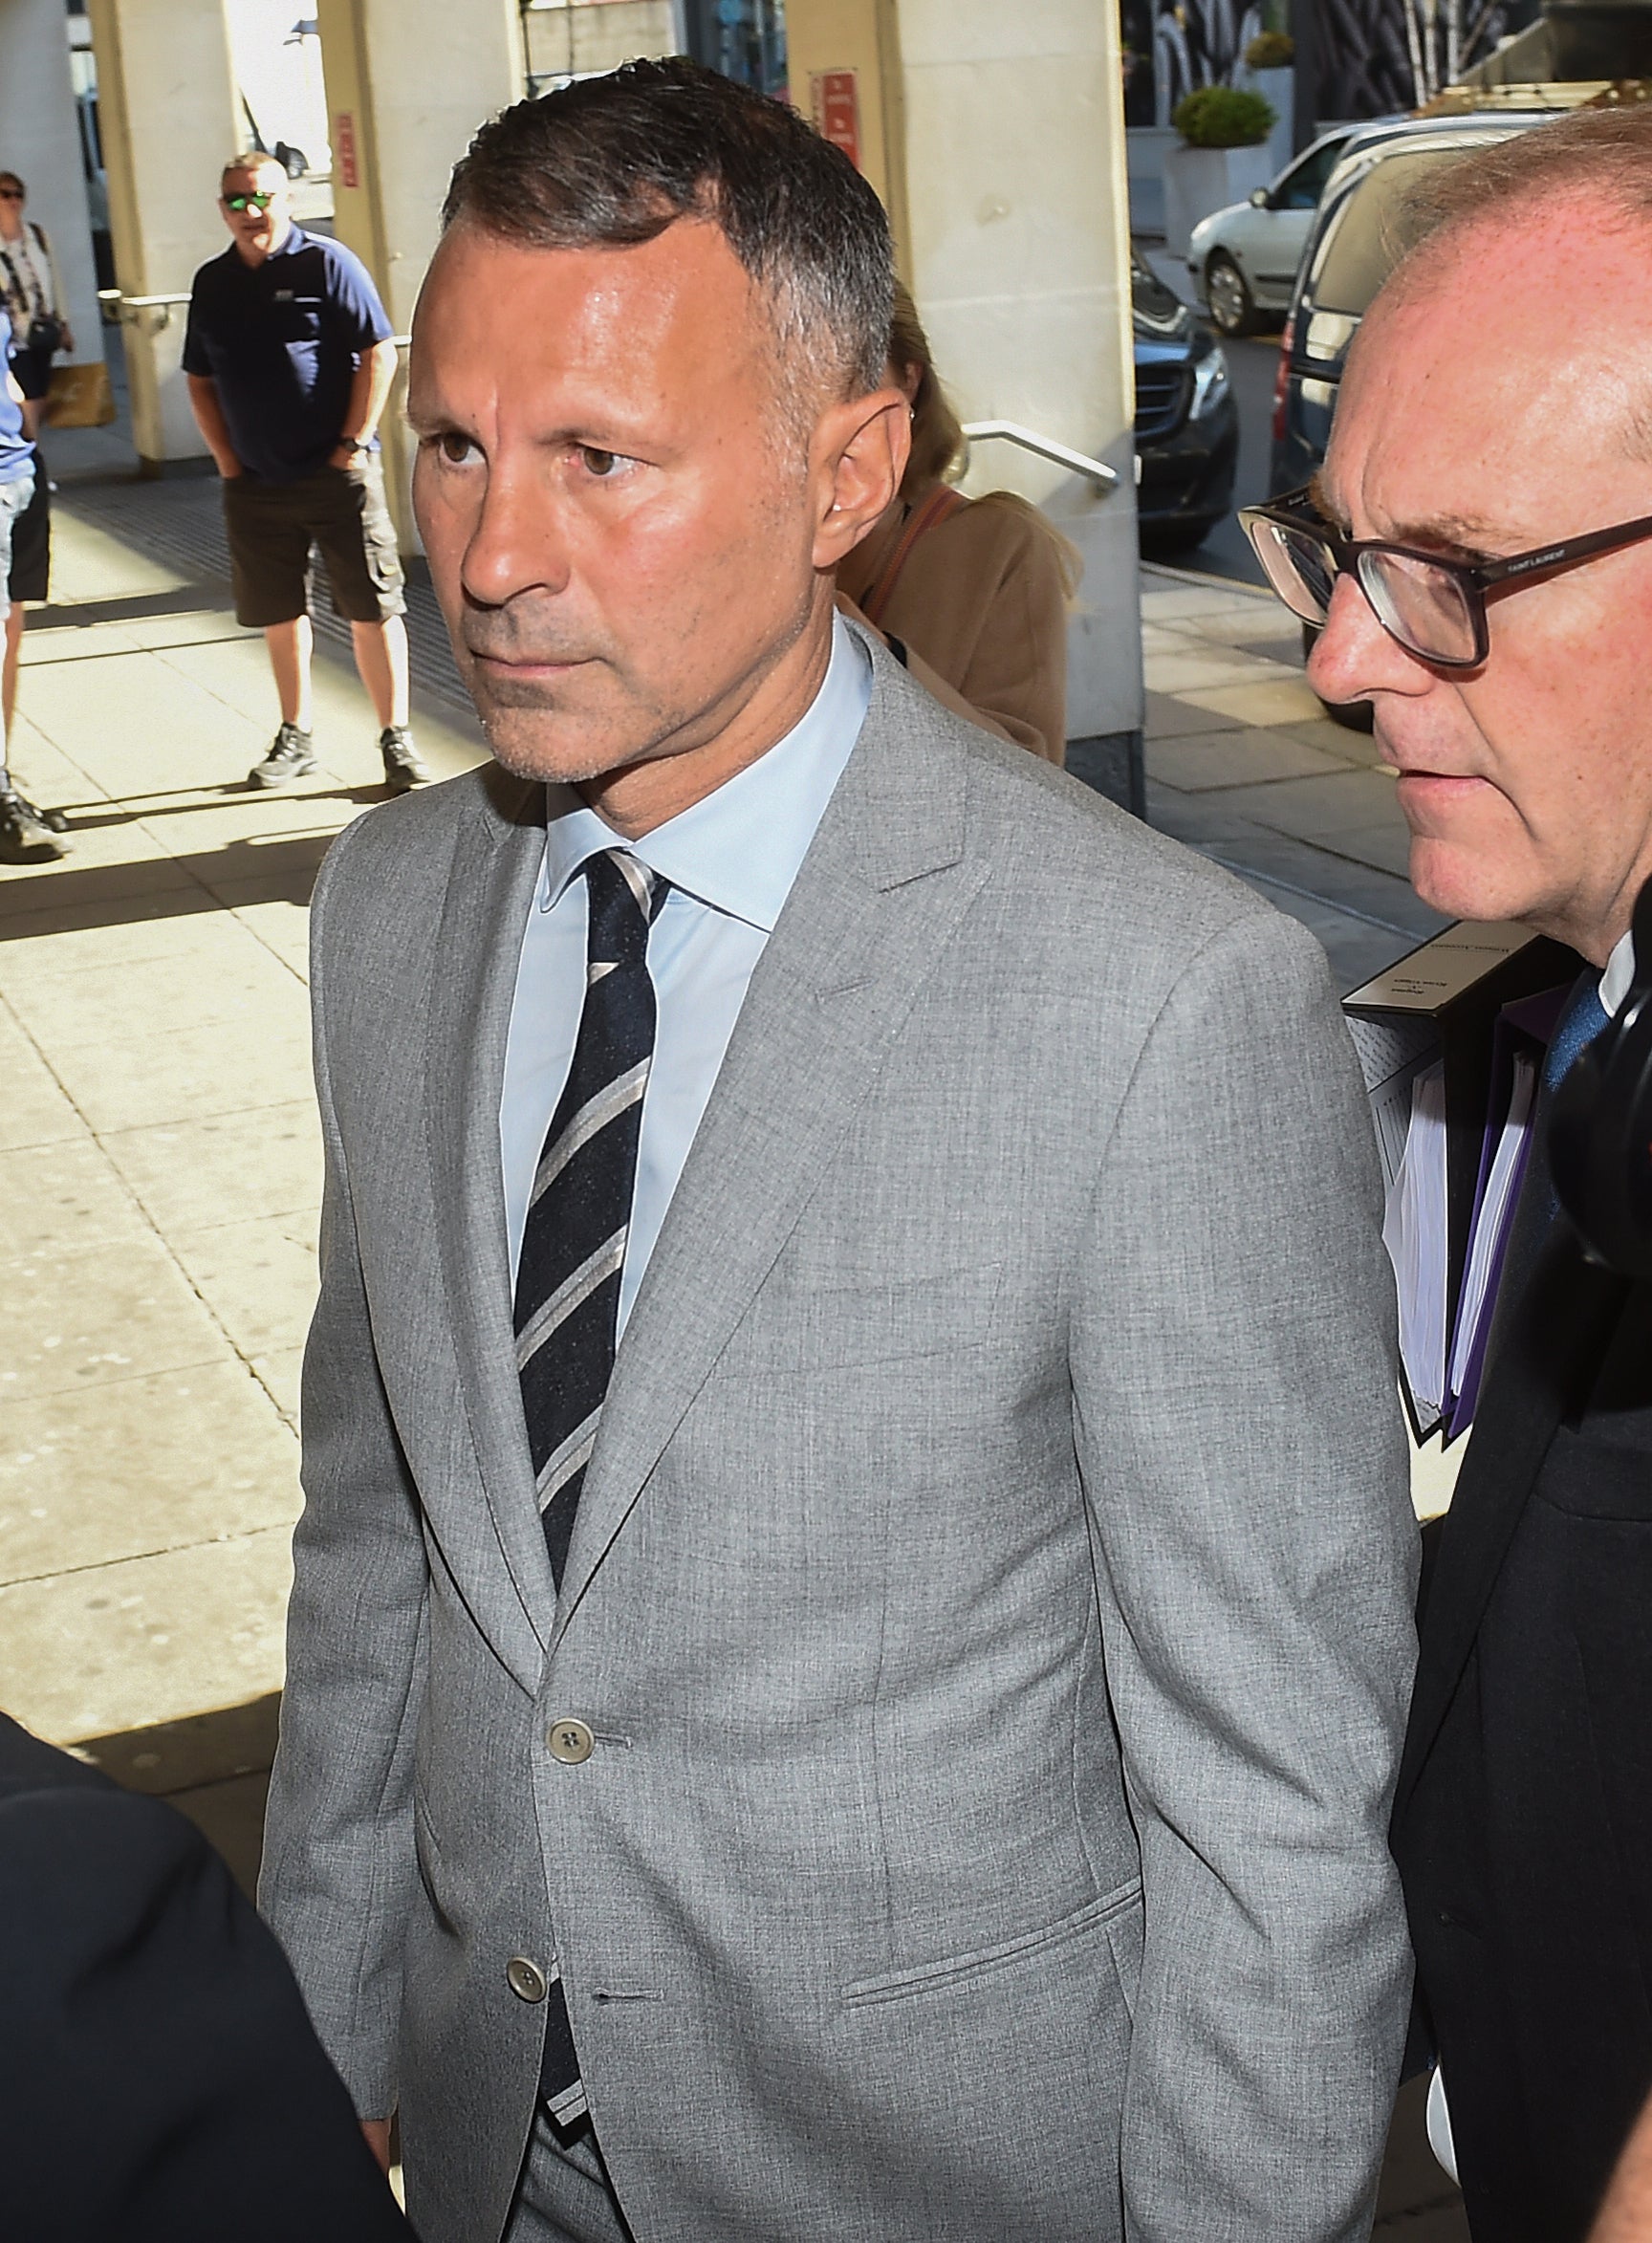 Ryan Giggs is on trial accused of assault